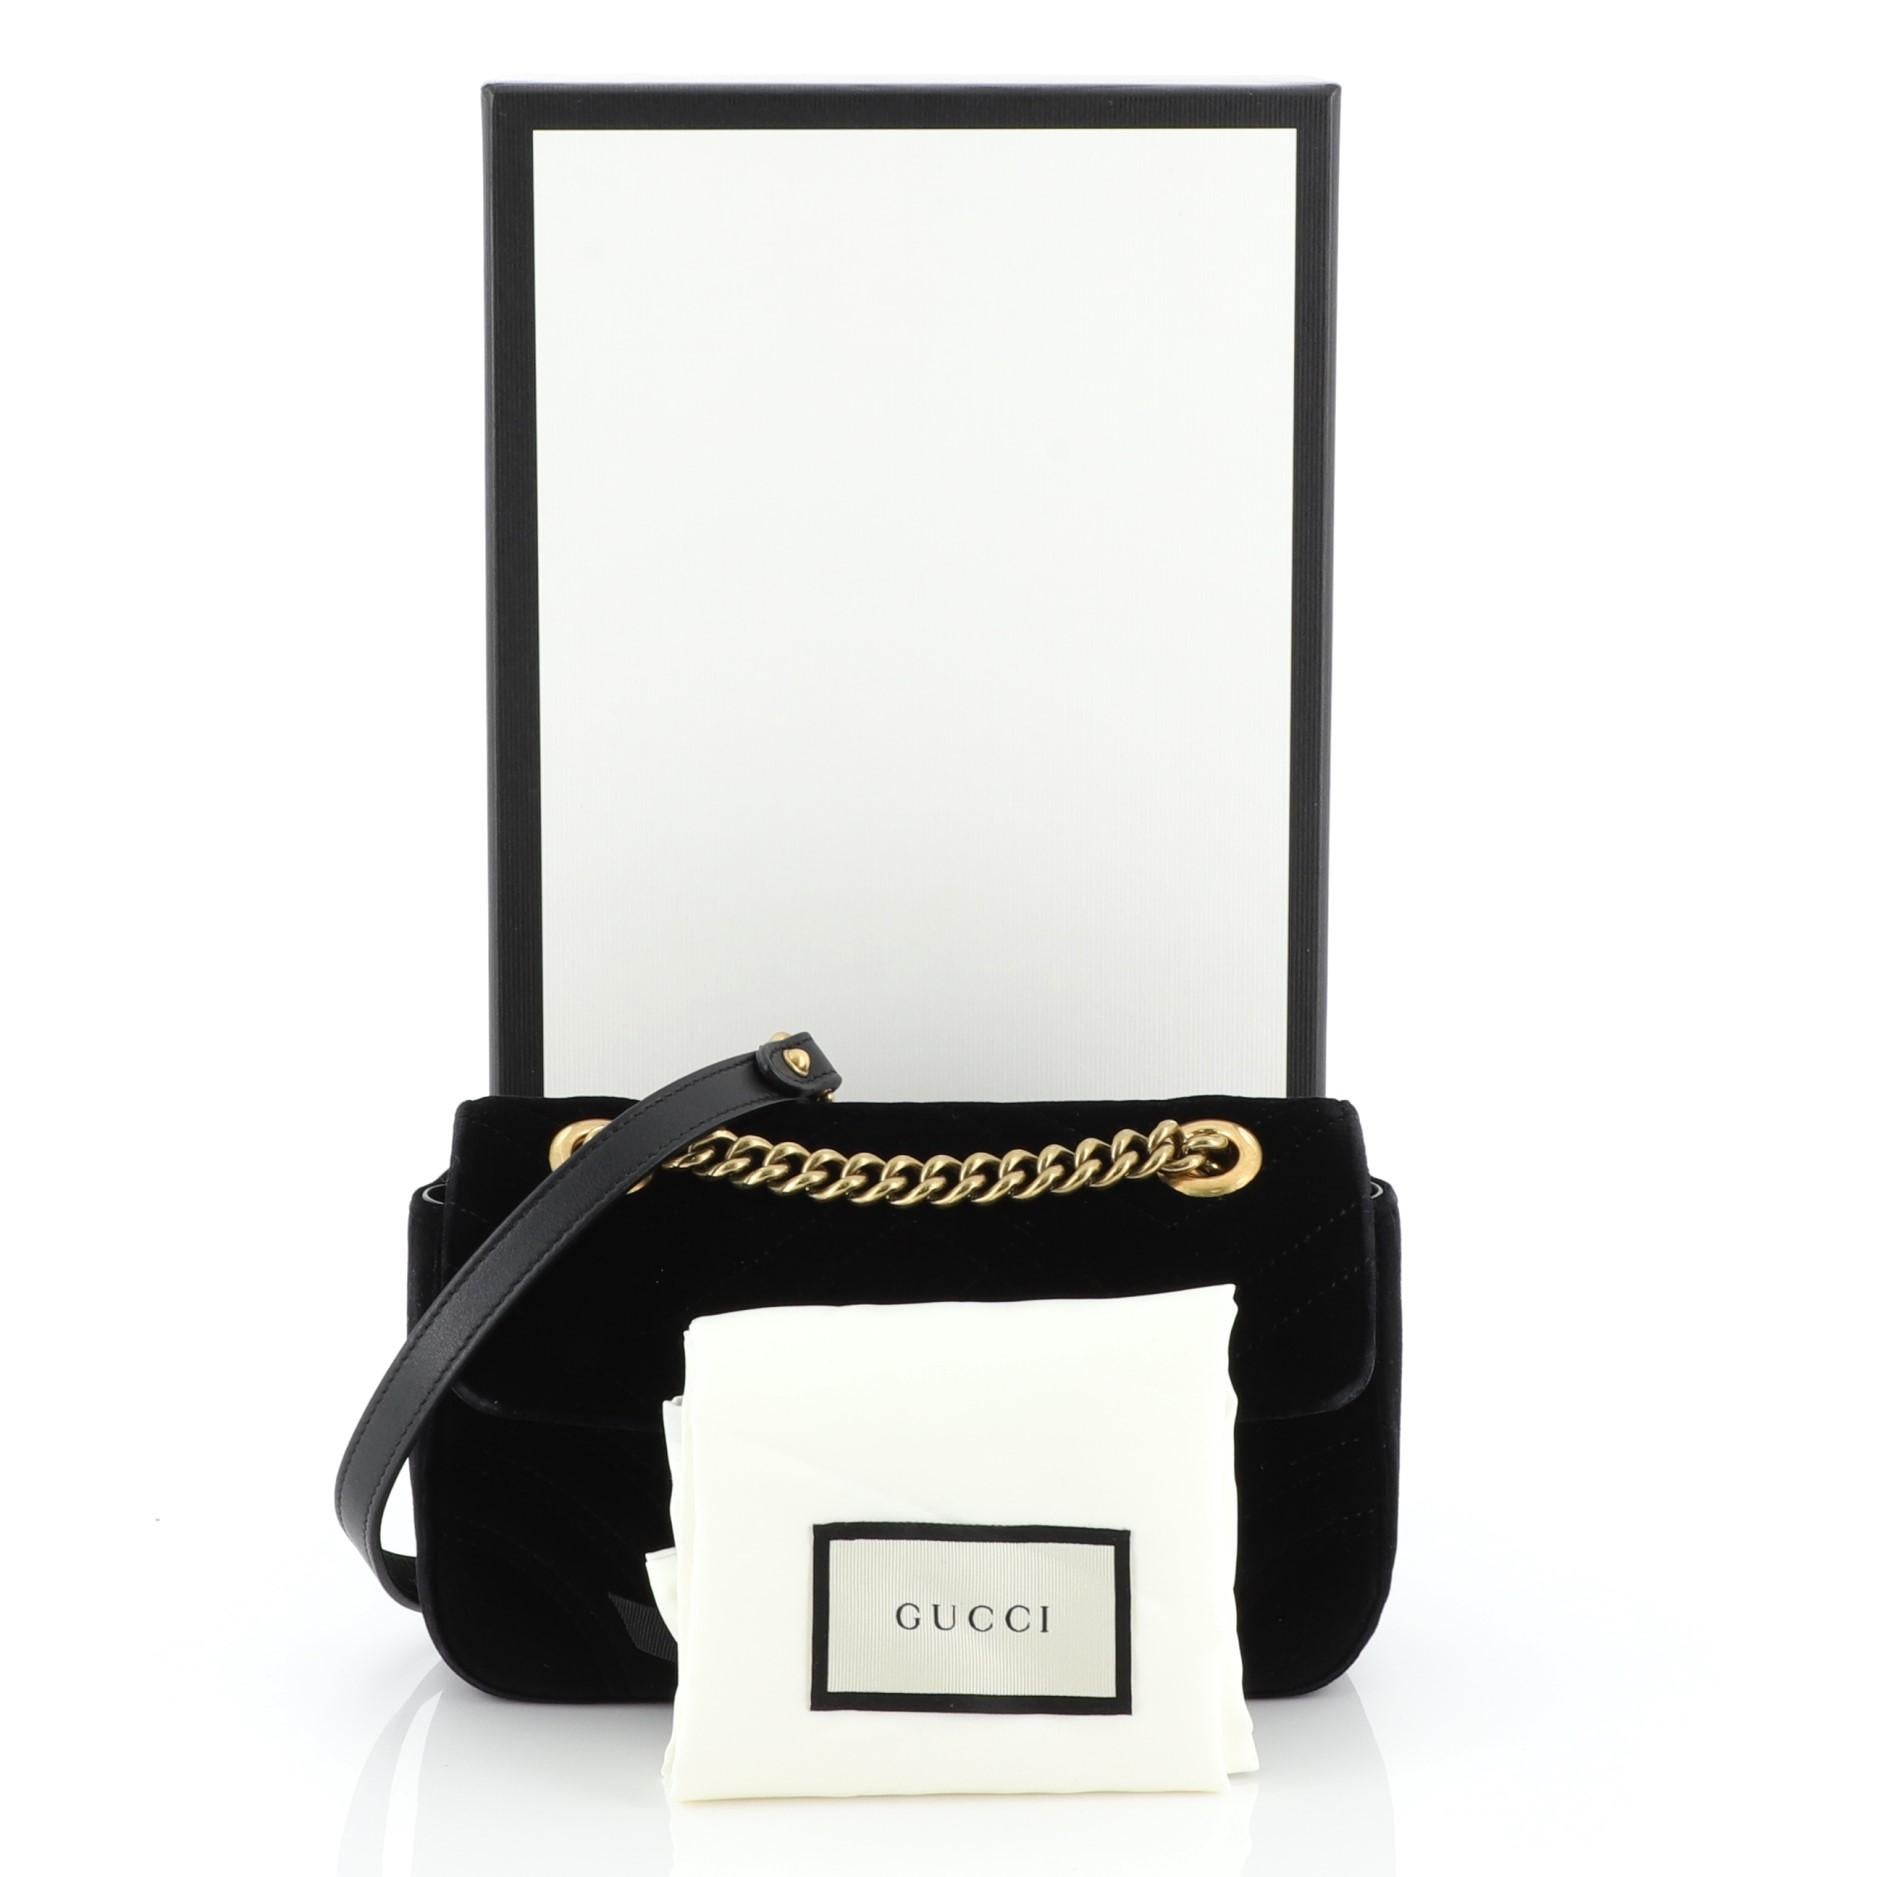 This Gucci GG Marmont Flap Bag Matelasse Velvet Small, crafted from black matelasse velvet, features chain link strap with leather pad, flap top with GG logo, and aged gold-tone hardware. Its push-lock closure opens to a pink satin interior with